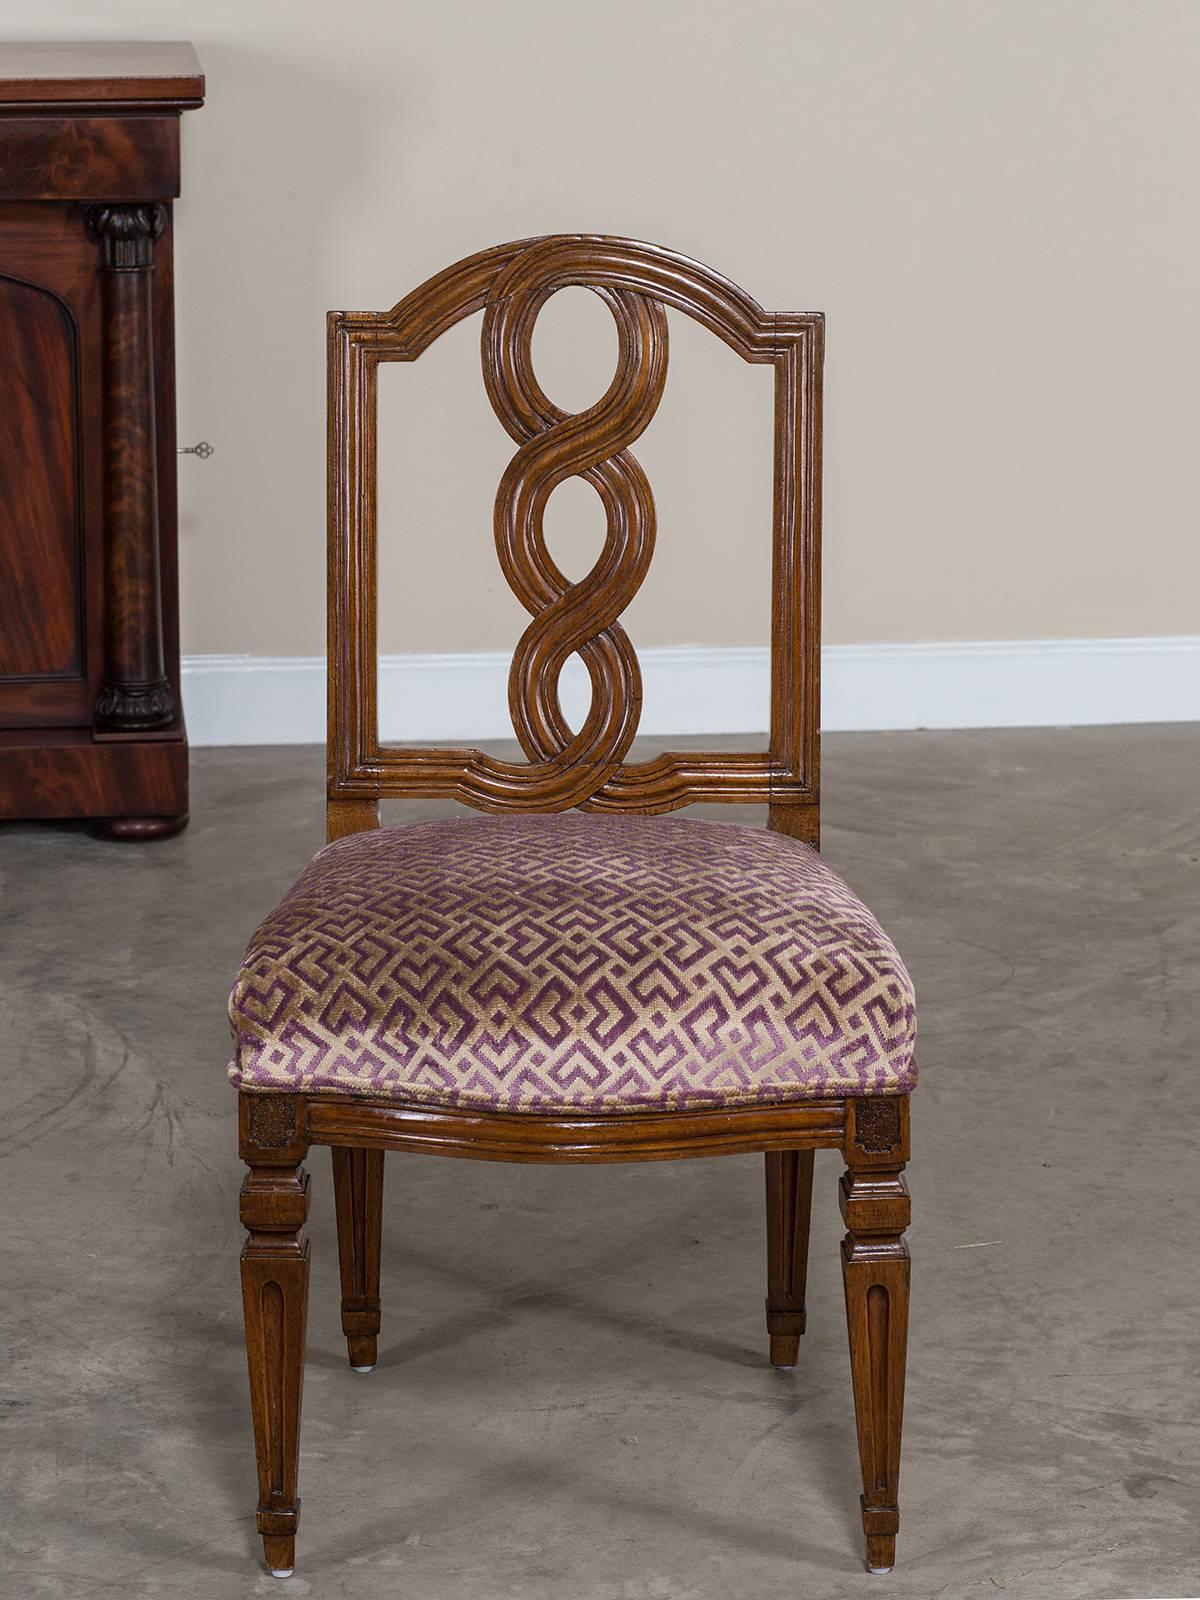 Receive our new selections direct from 1stdibs by email each week. Please click Follow Dealer below and see them first!

The clean architectural lines of this antique Italian neoclassical walnut chair circa 1780 give it an exceptionally powerful